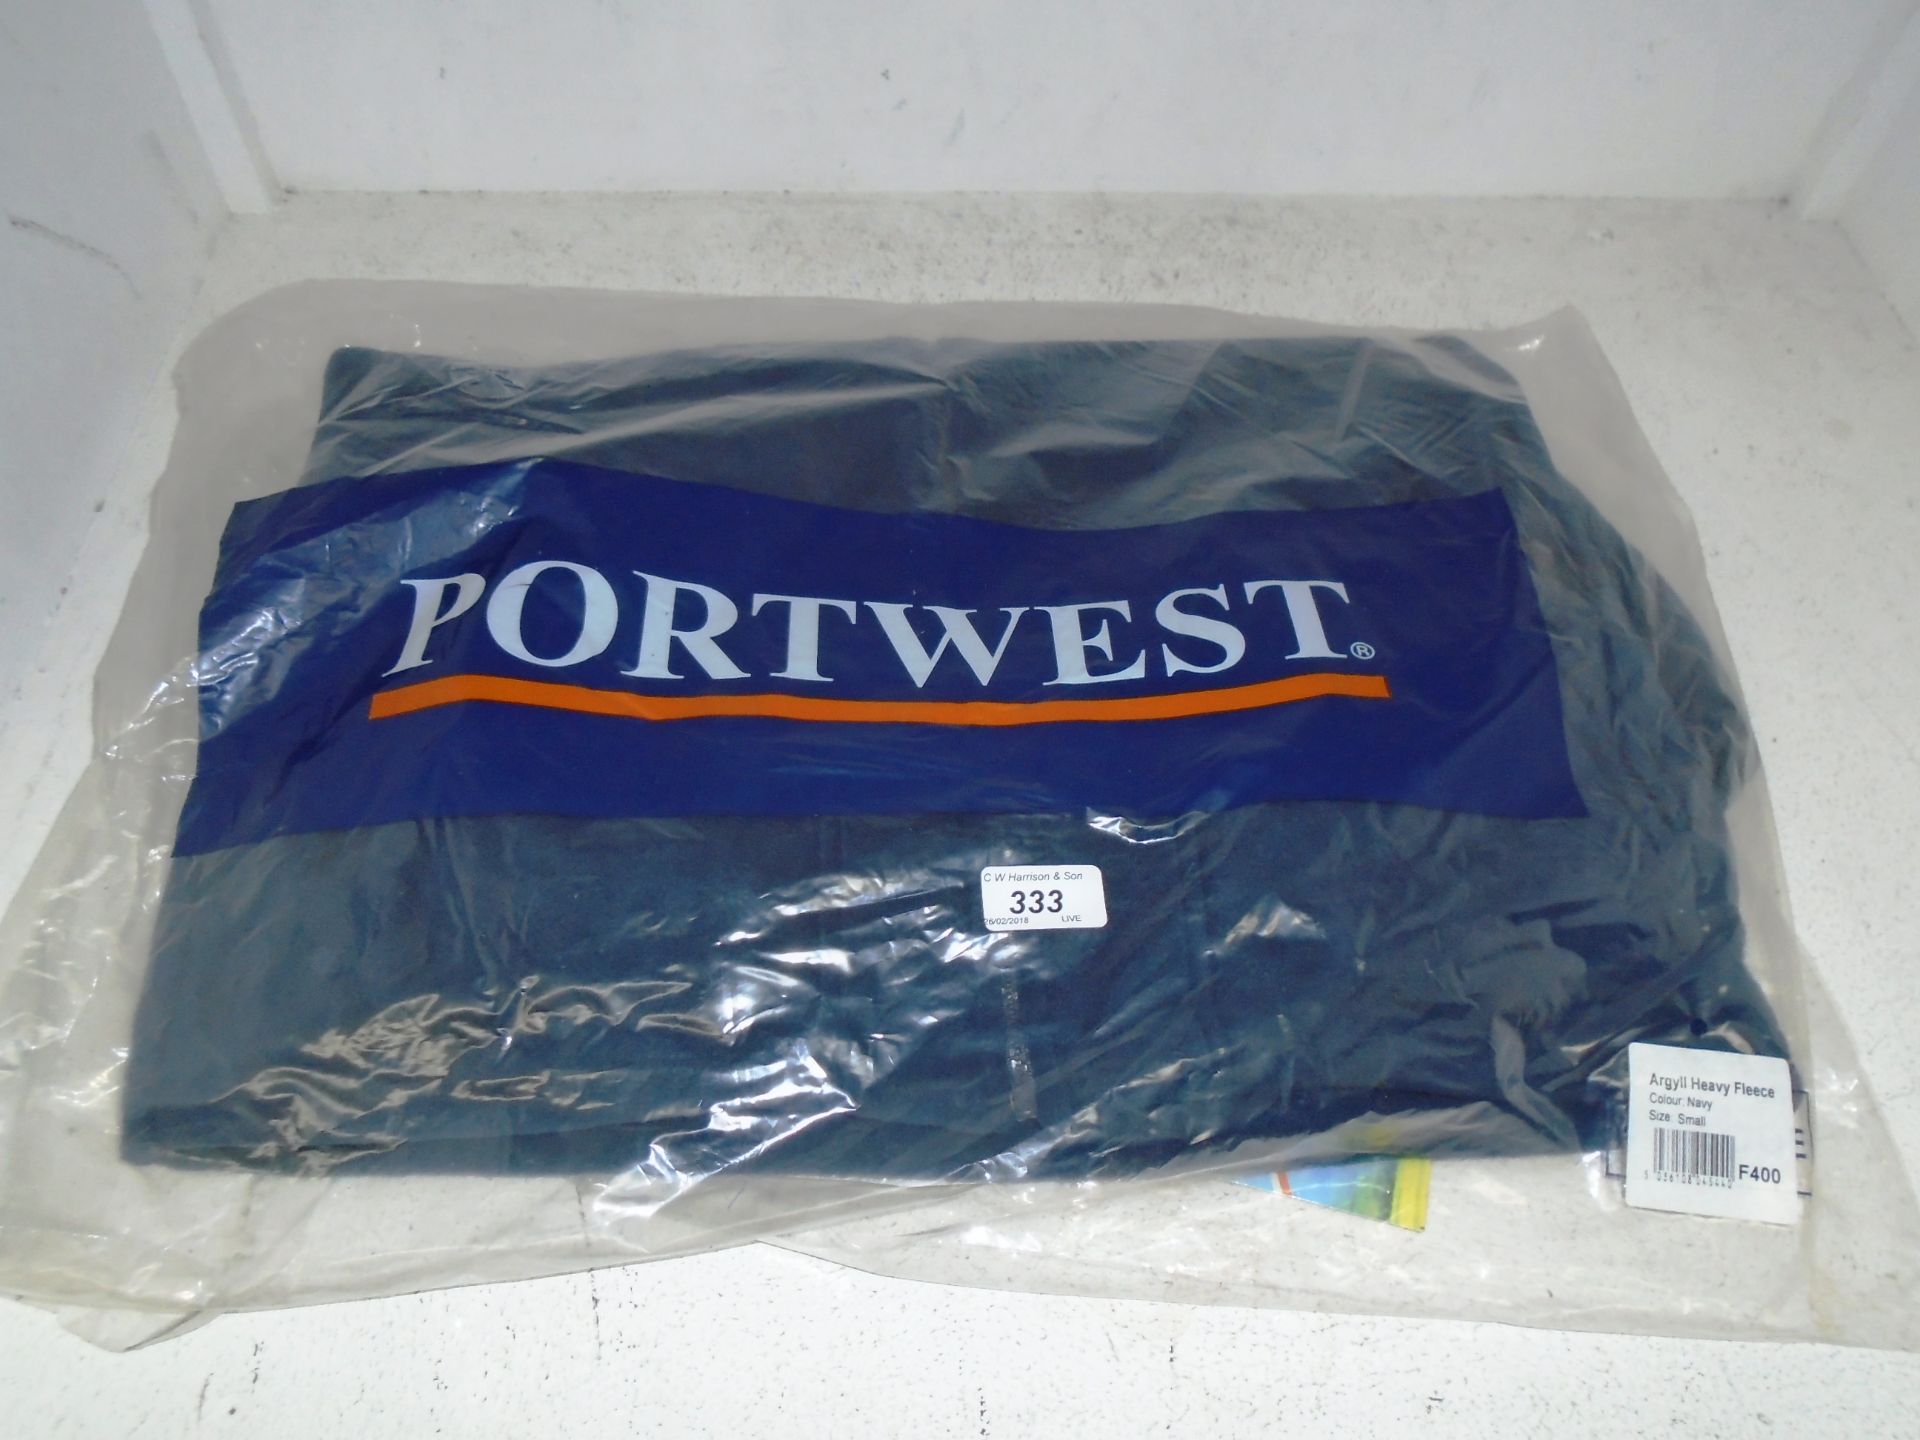 4 x Portwest Outdoor protection Argyll heavy fleece jackets size XL in navy